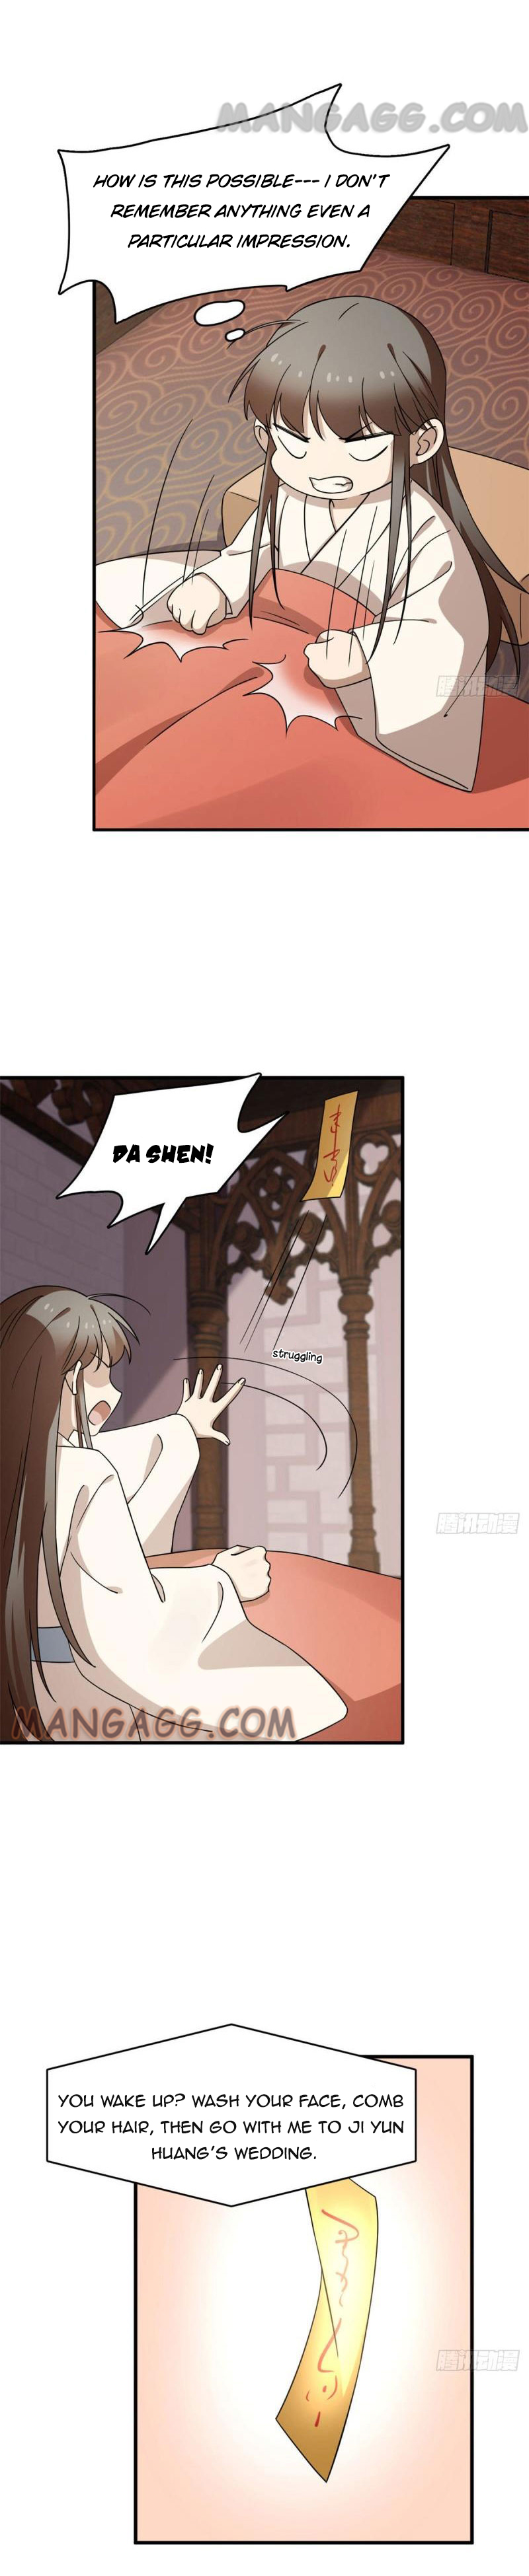 Queen of Posion: The Legend of a Super Agent, Doctor and Princess Chapter 222 - Page 1